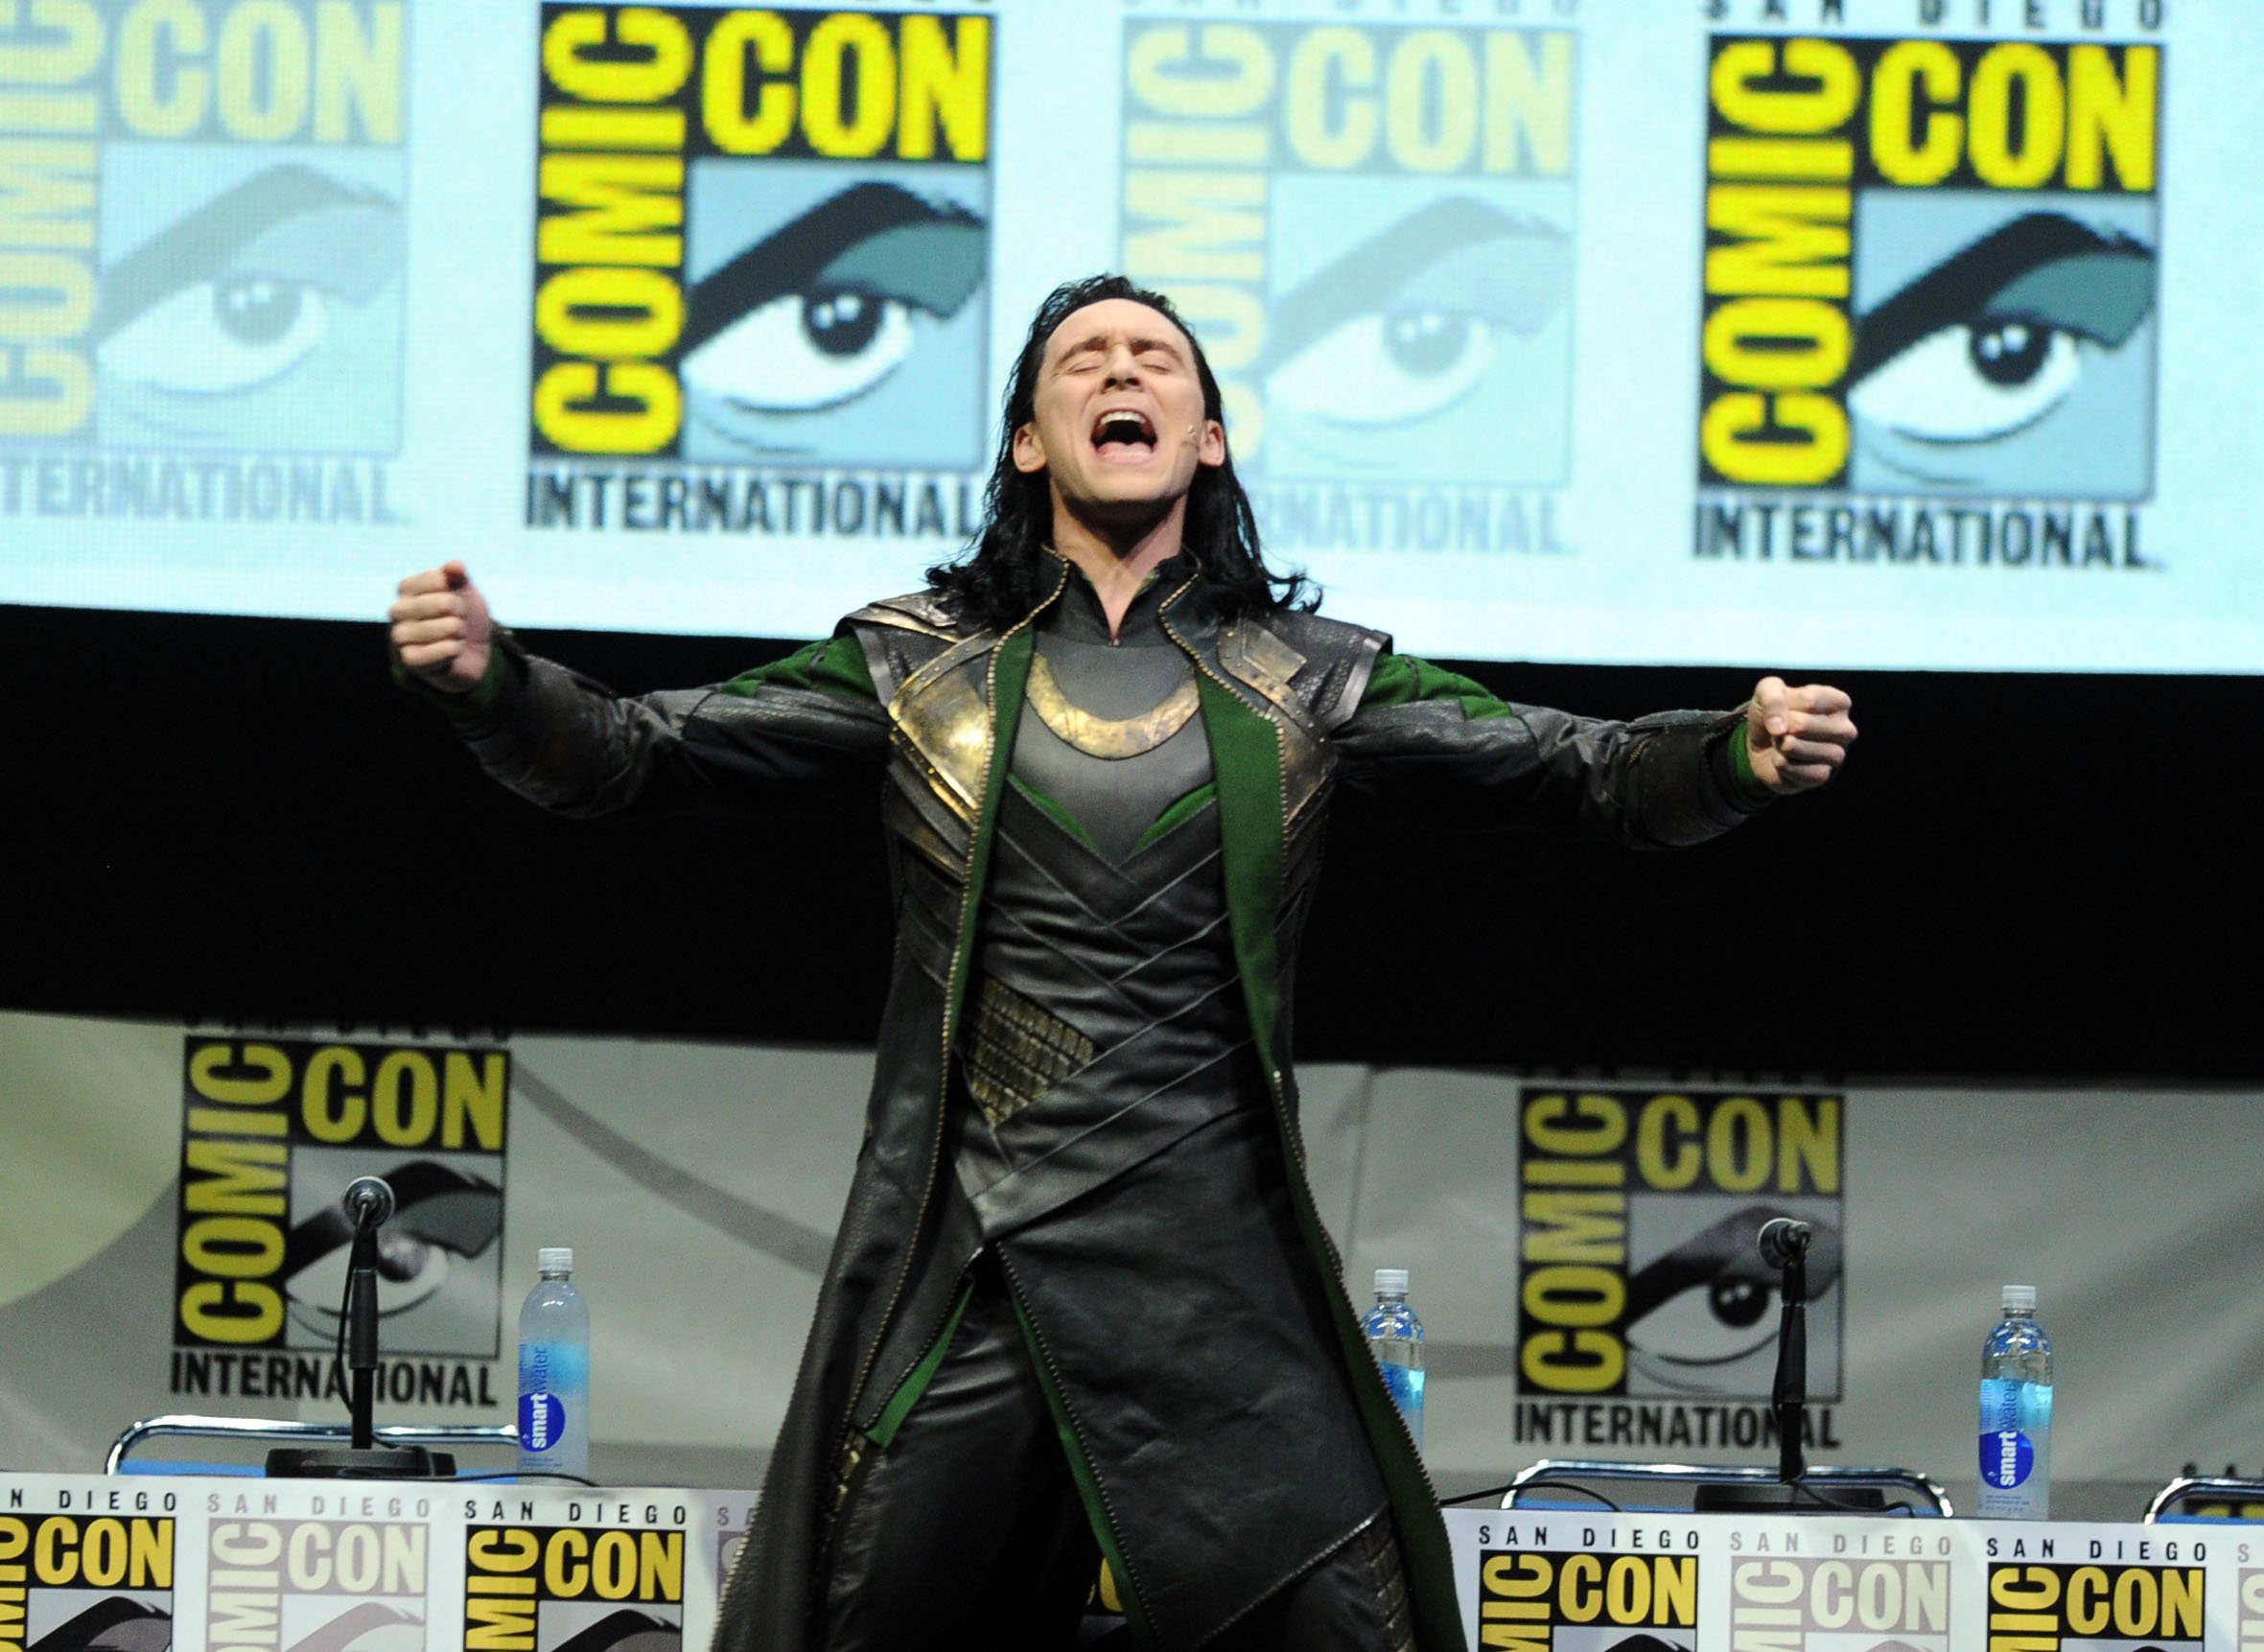 Tom Hiddleston as Loki stands on stage in front of a San Diego Comic Con poster